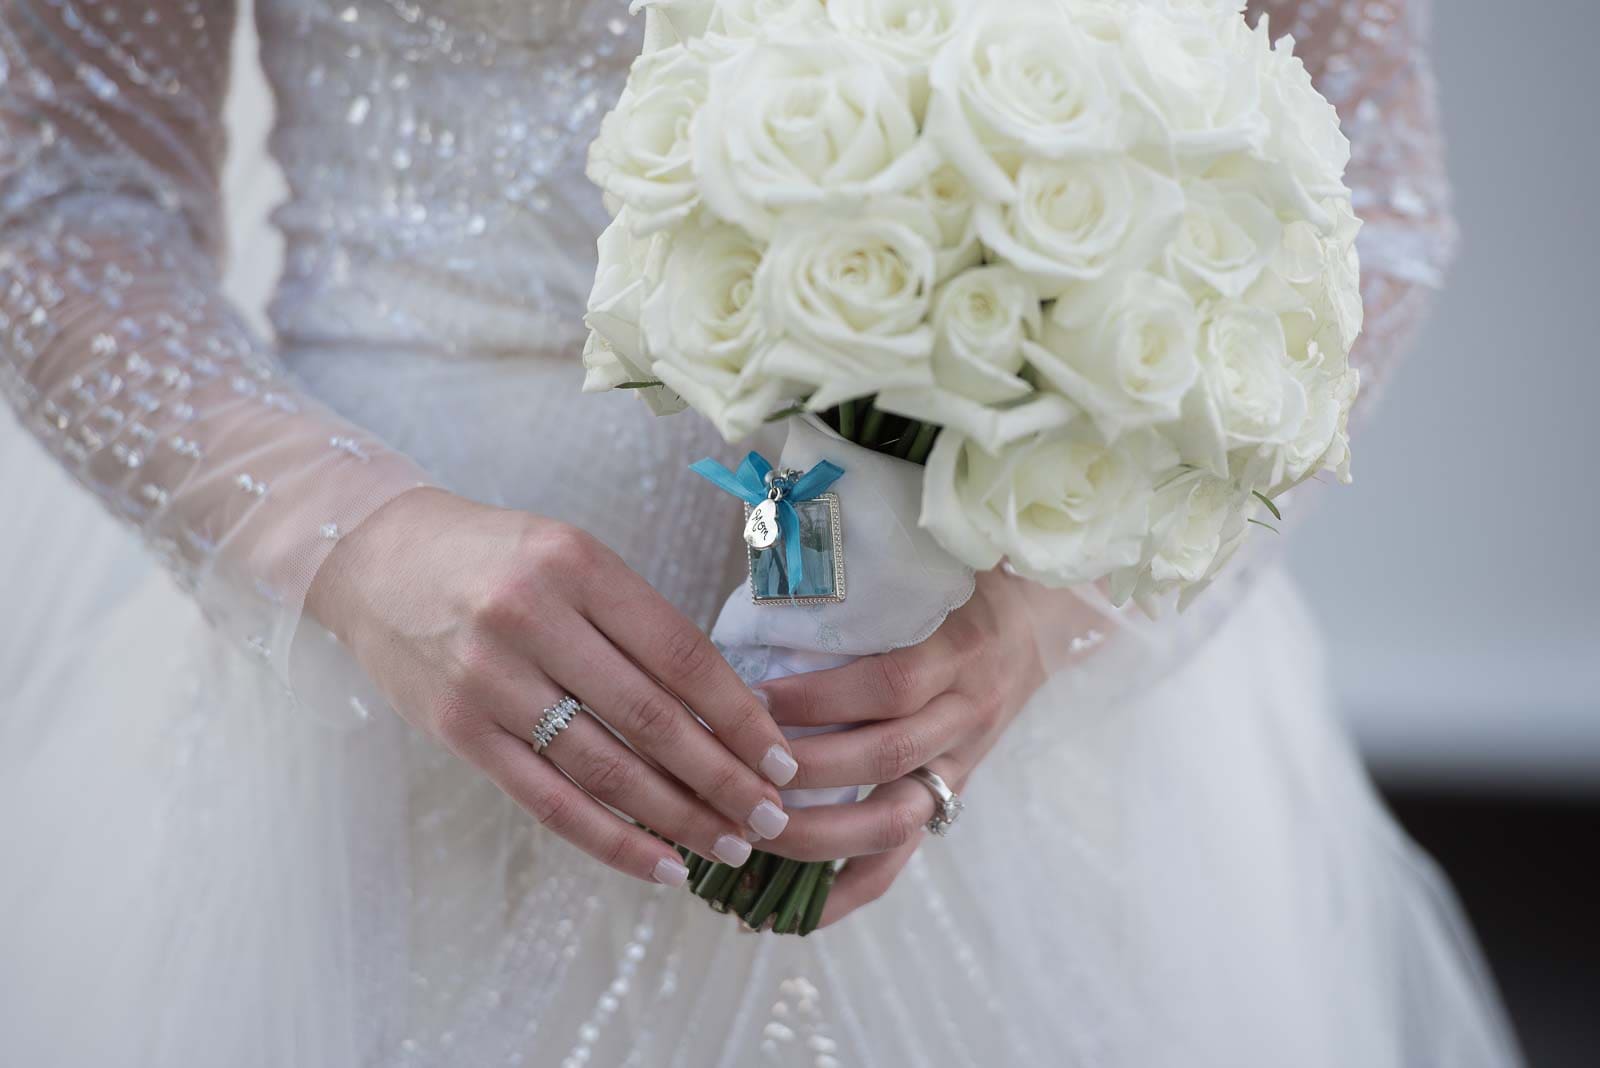 A bride holding her bouquet of white roses.